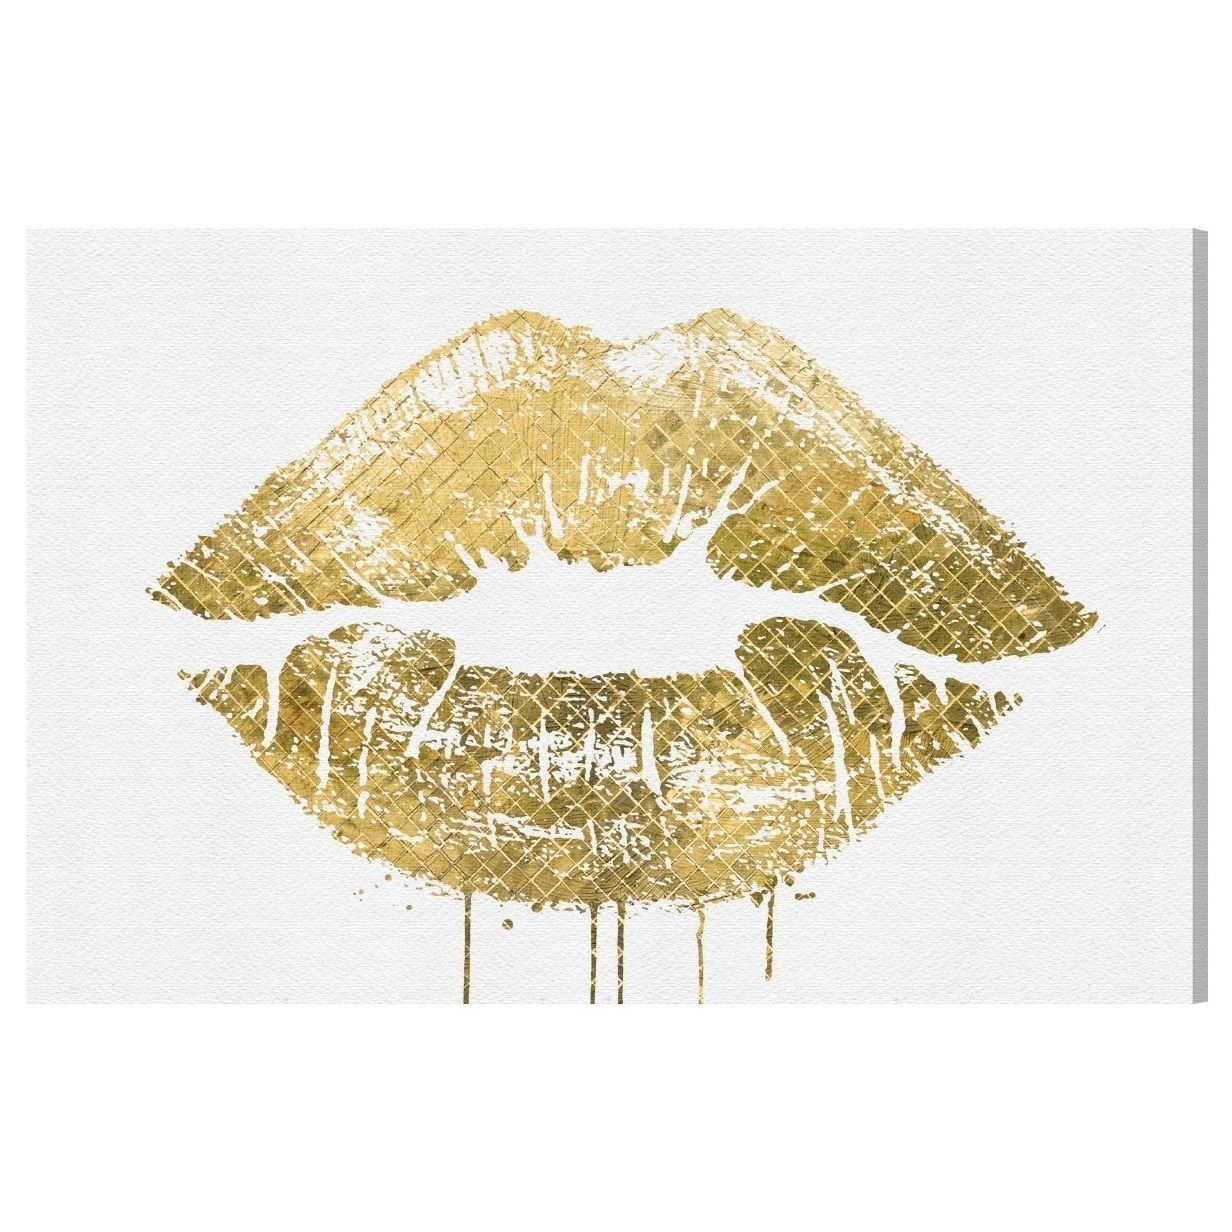 Stunning Design Gold Wall Art Stickers Decor Canvas Uk, Metal Wall In Best And Newest Gold Wall Art (View 8 of 15)